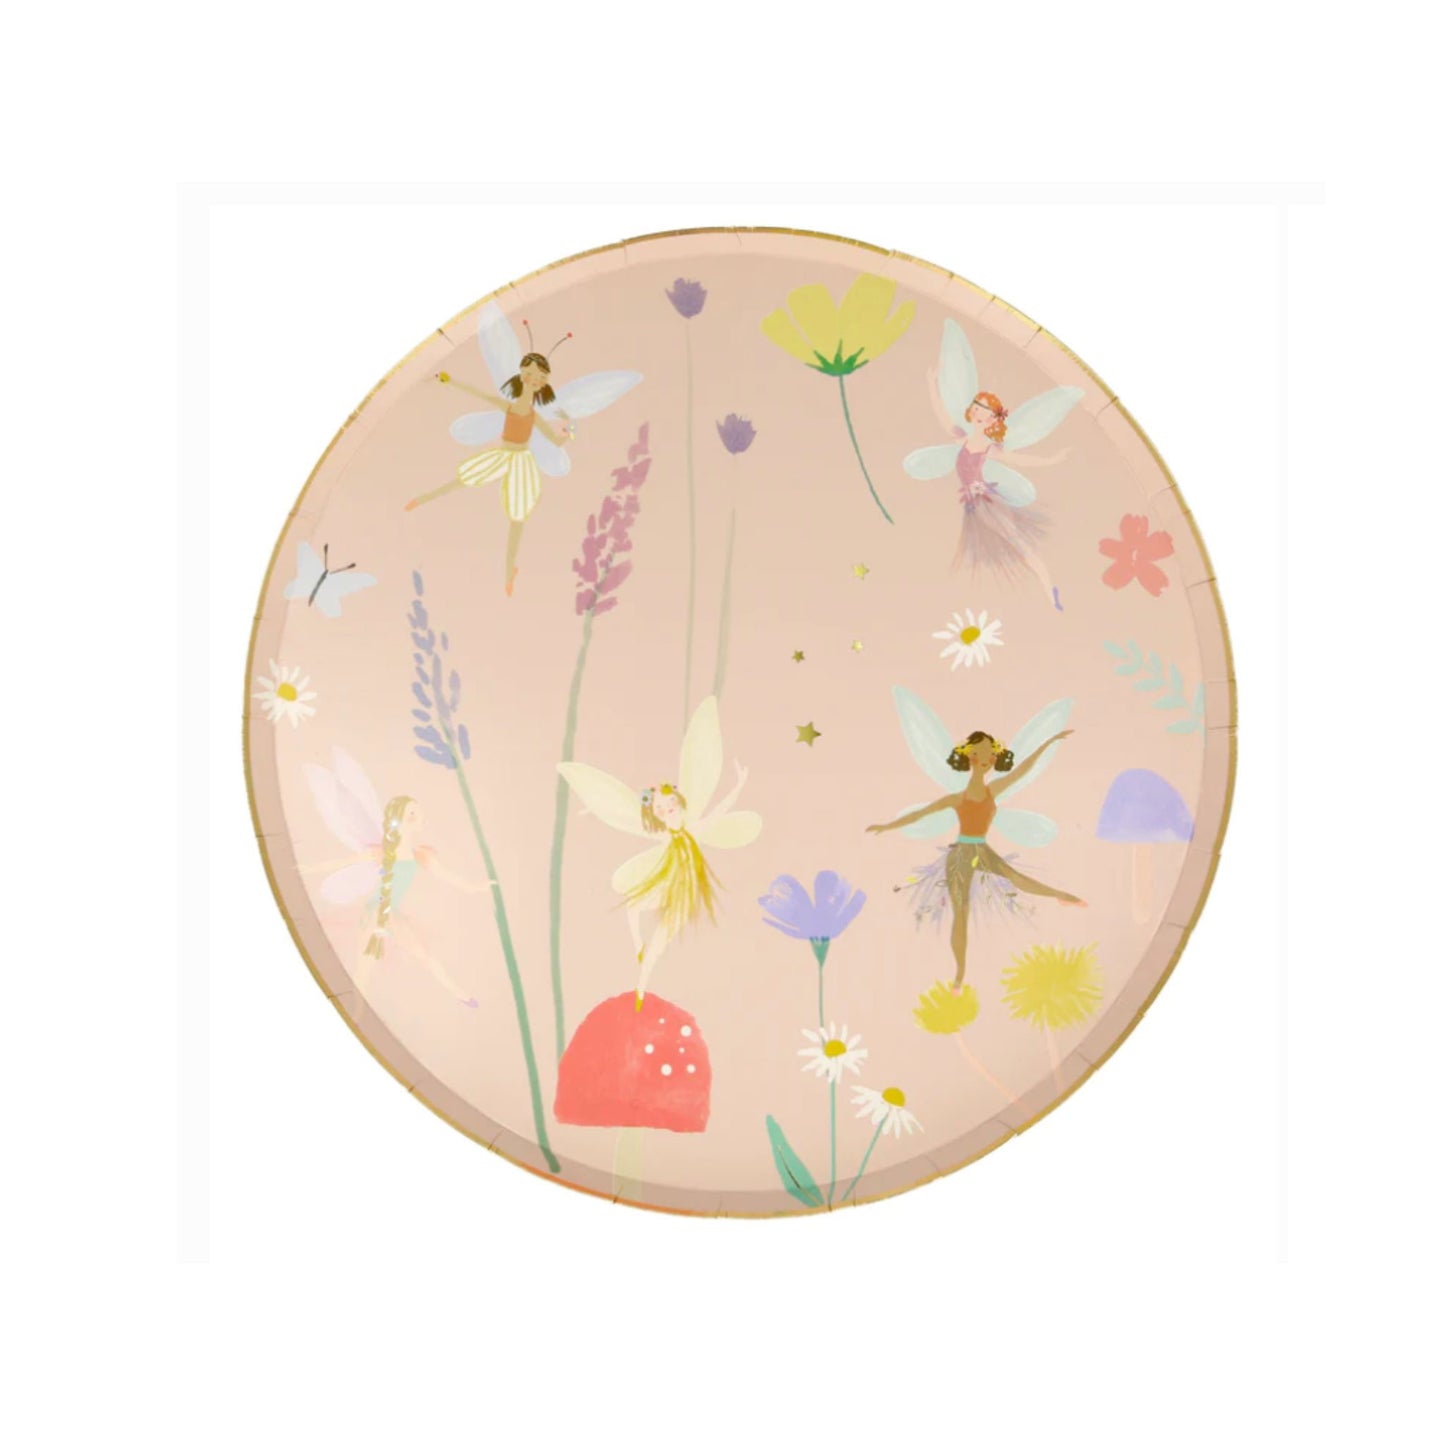 Meri Meri Fairy dinner plates with beautiful fairies, toadstools and flowers. Peach colour with lilac, red and green. Gold edge